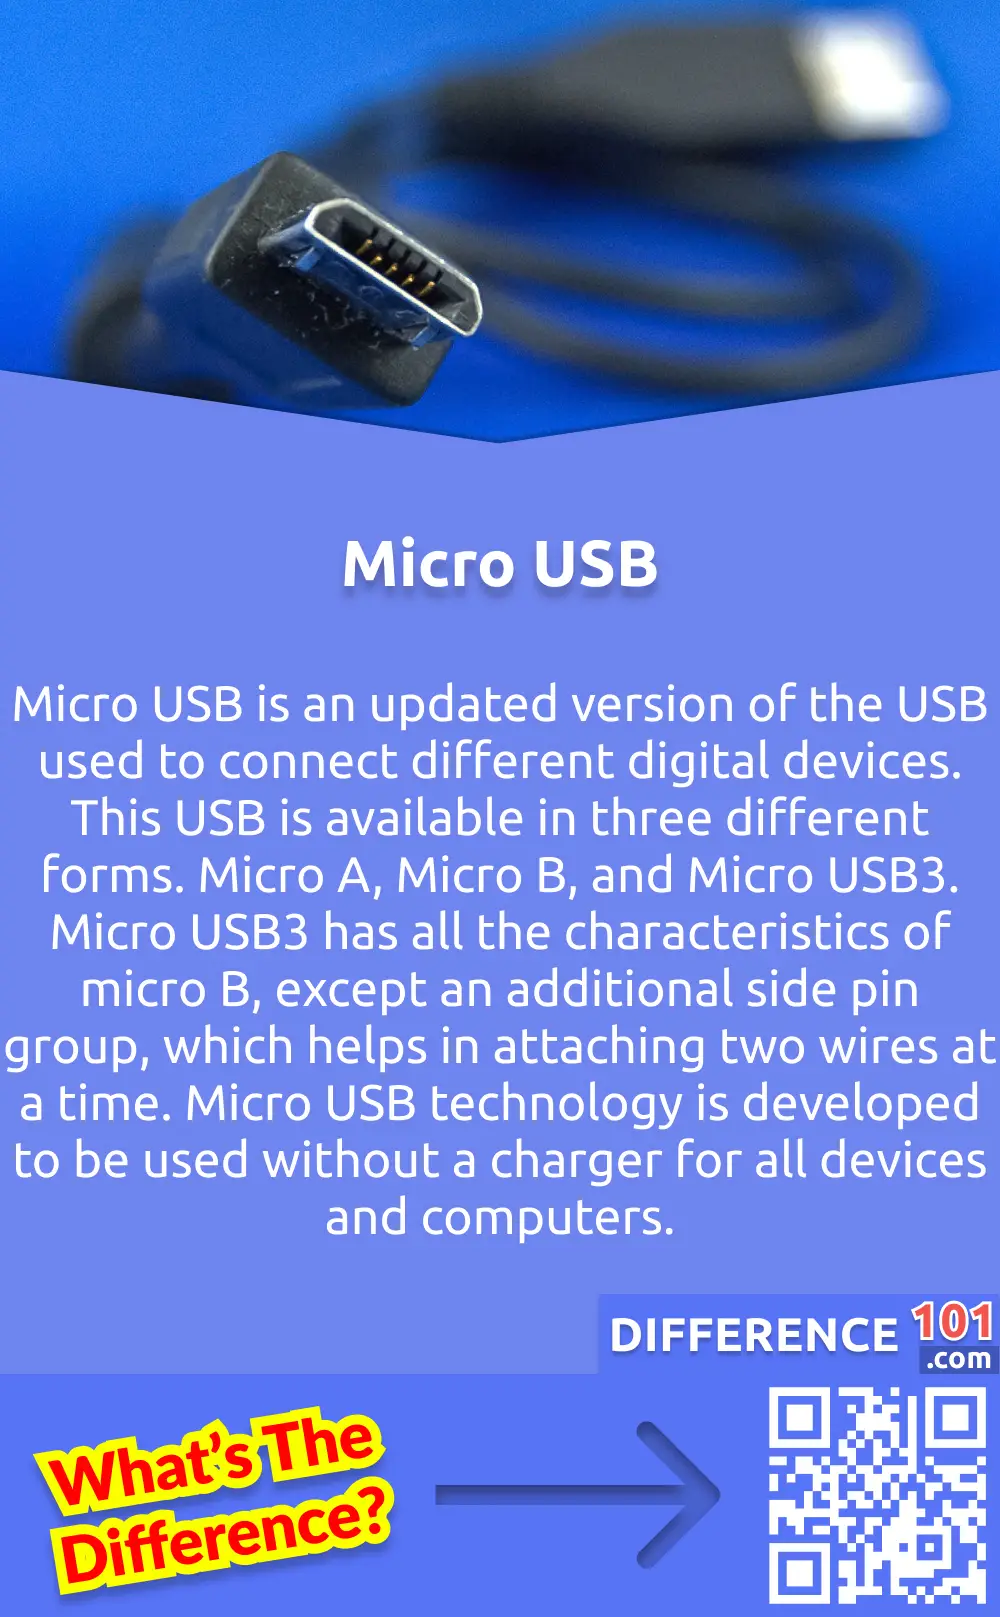 What is Micro USB? Micro USB is an updated version of the USB used to connect different digital devices. This USB is available in three different forms. Micro A, Micro B, and Micro USB3. Micro USB3 has all the characteristics of micro B, except an additional side pin group, which helps in attaching two wires at a time. Micro USB technology is developed to be used without a charger for all devices and computers.